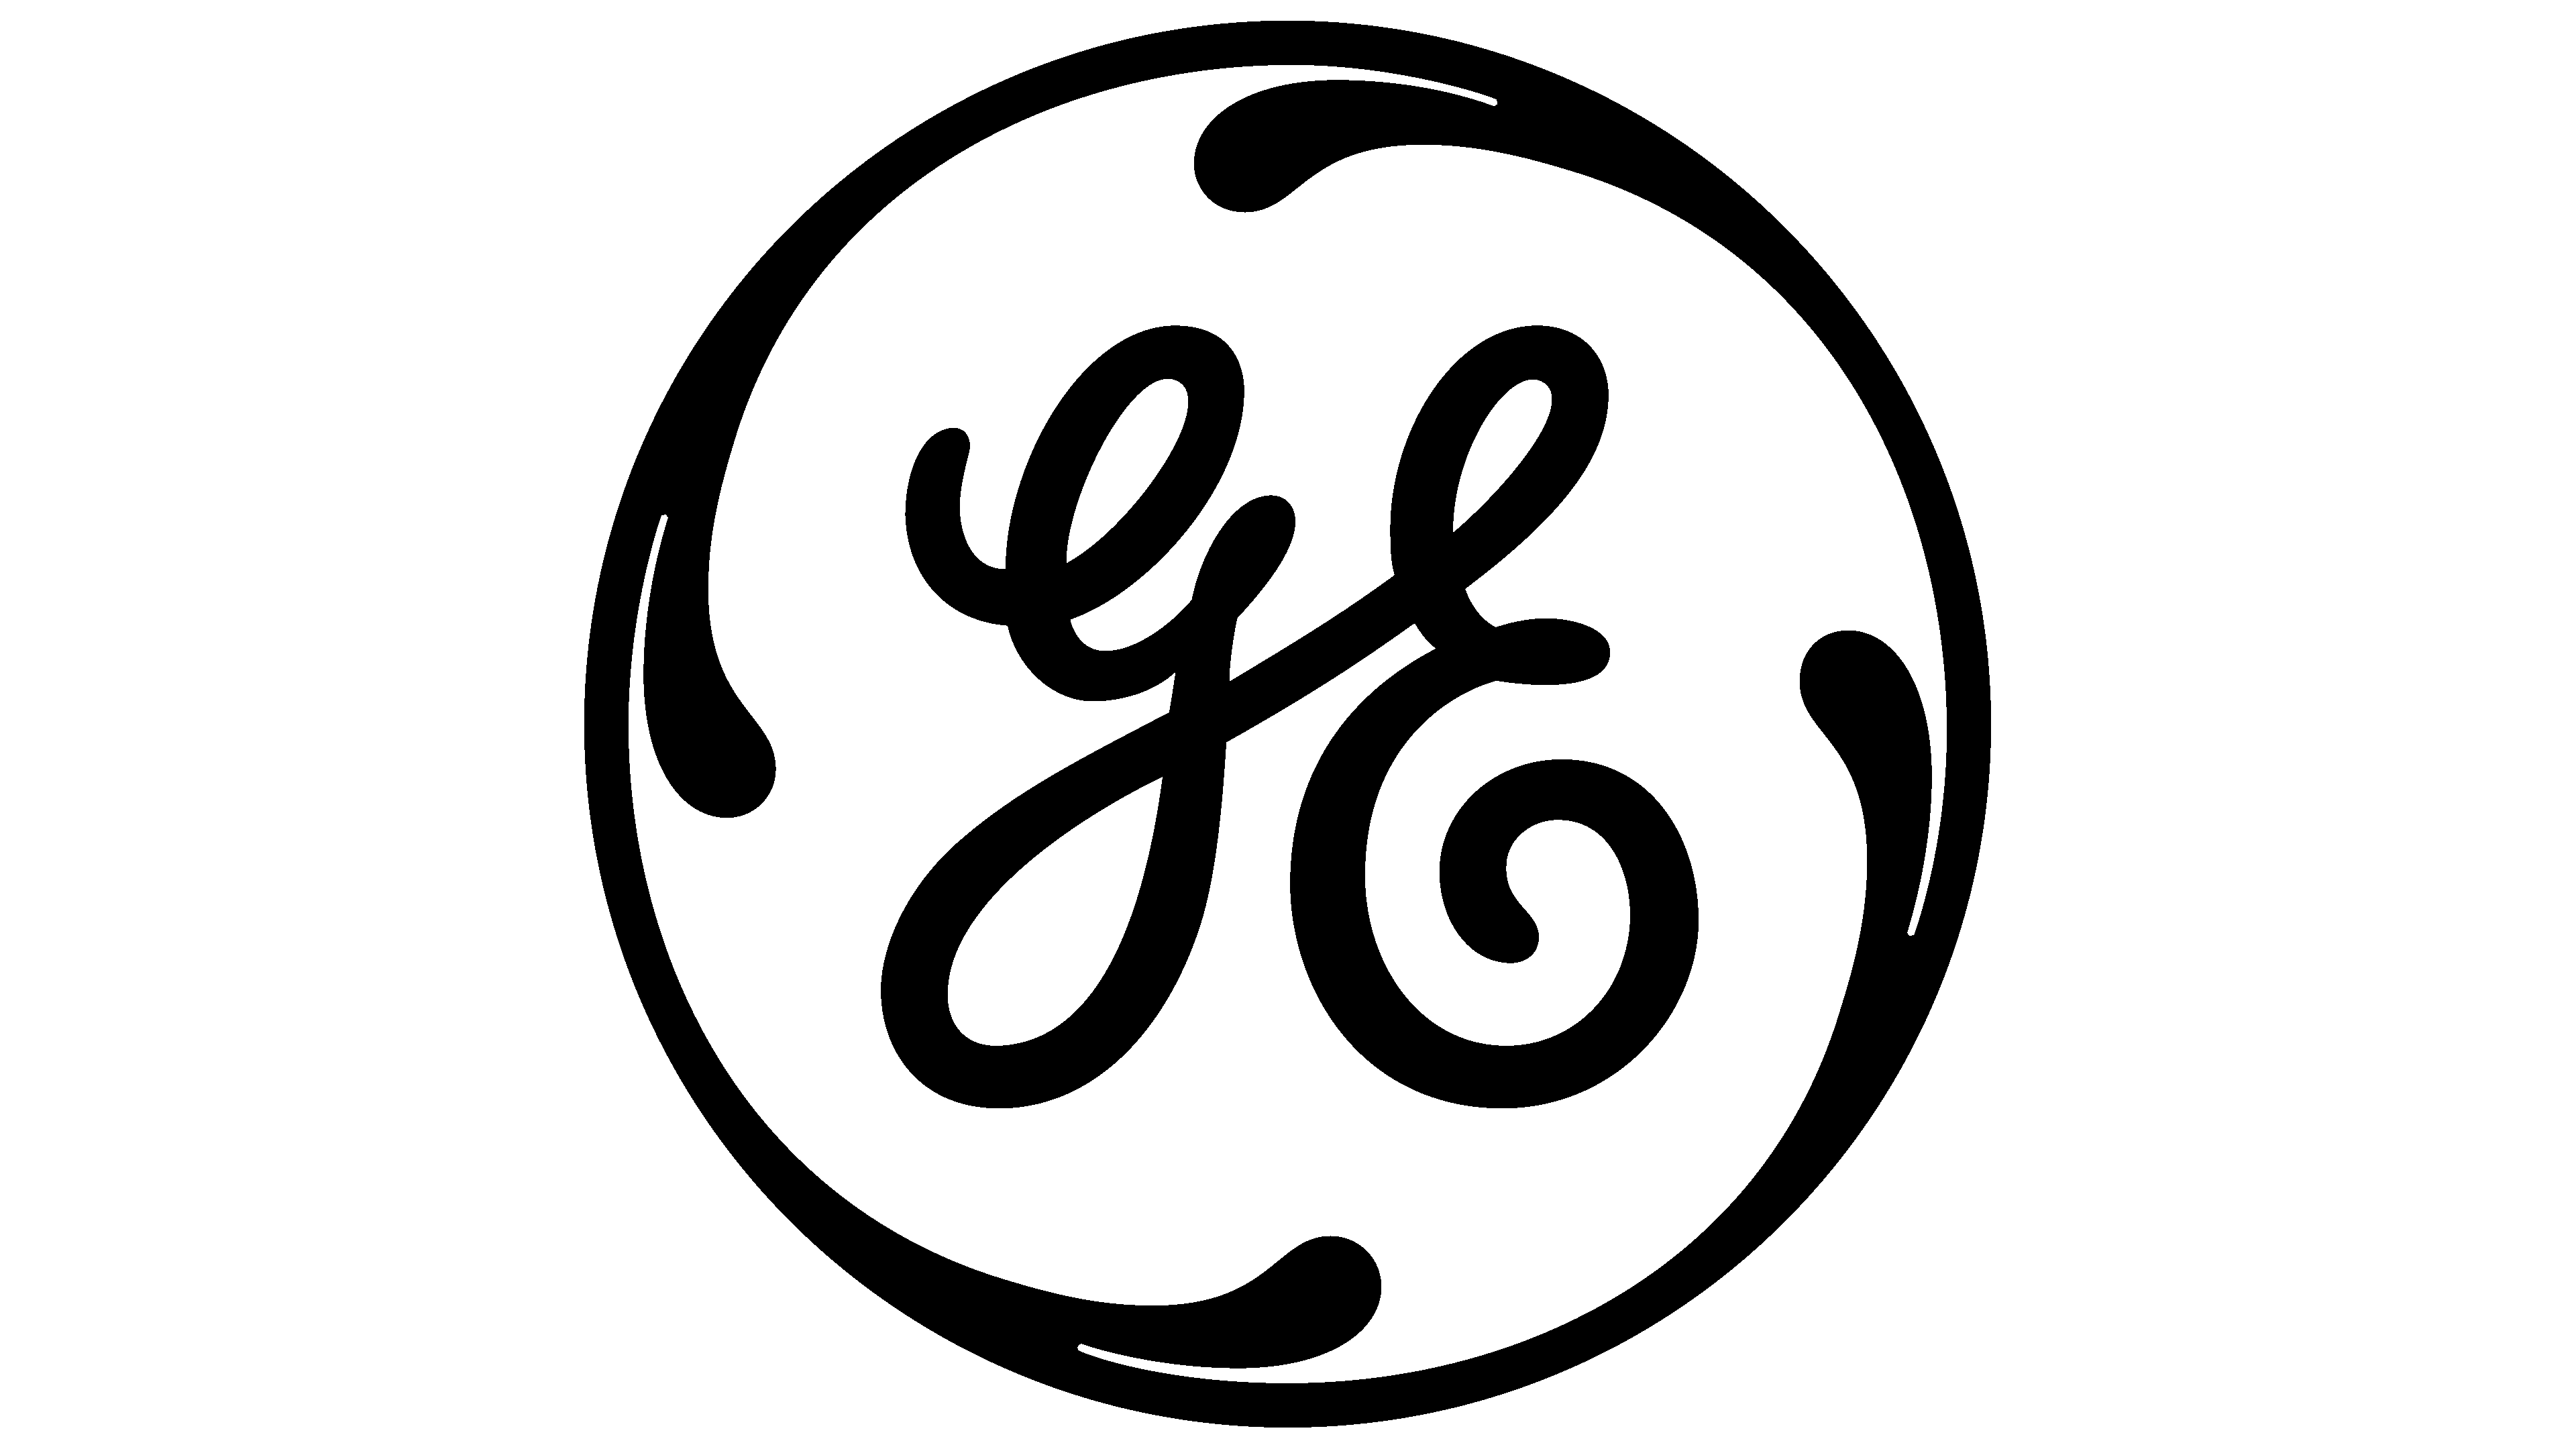 GENERAL ELECTRIC LOGO ON COLLECTOR MARBLE 